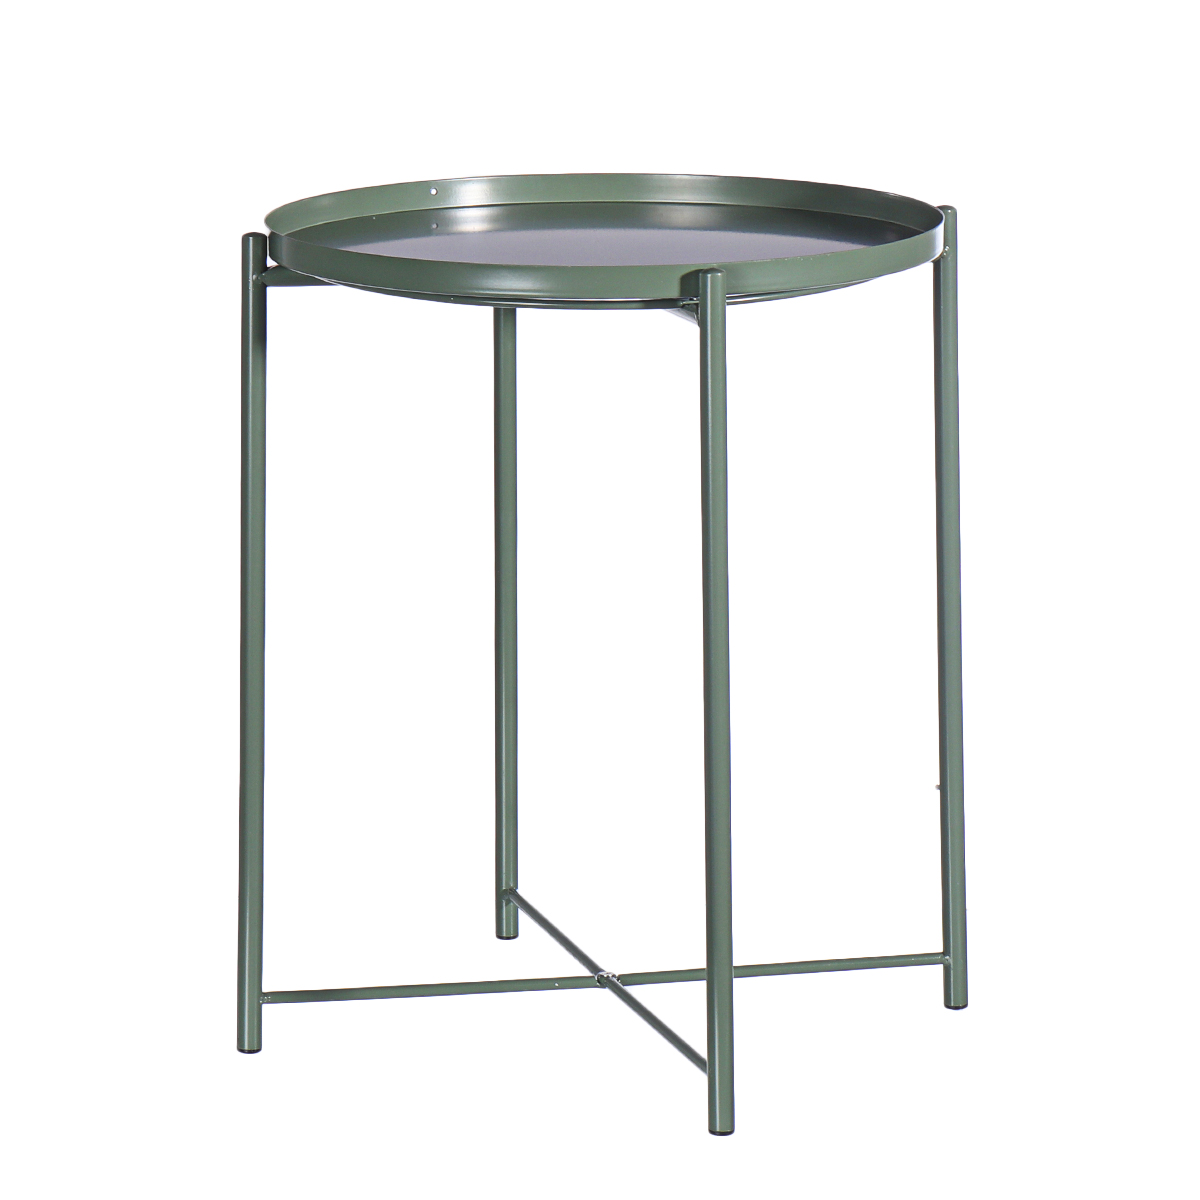 4452cm-Round-Side-End-Coffee-Table-Steel-Tray-Metal-Side-Desk-Furniture-for-Home-Bedside-Storage-Sup-1767827-9